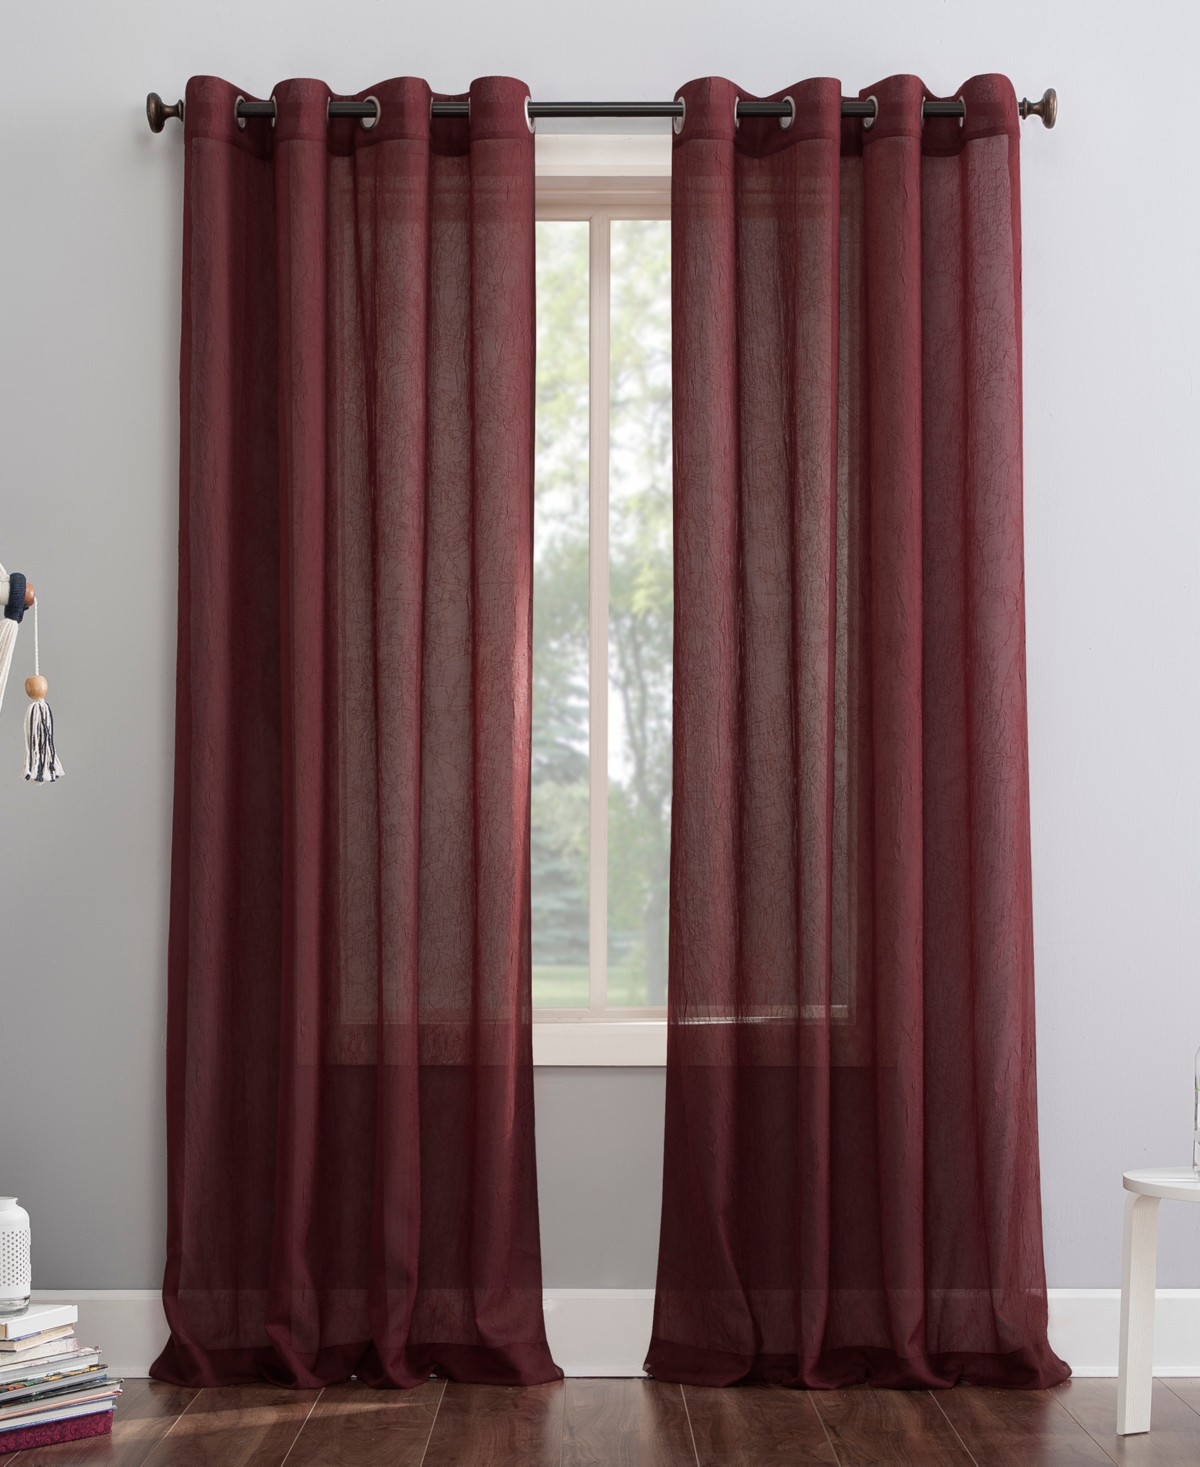 No. 918 Erica Crushed Voile Sheer Grommet Single Curtain Panel, 51" X 72" In Burgundy